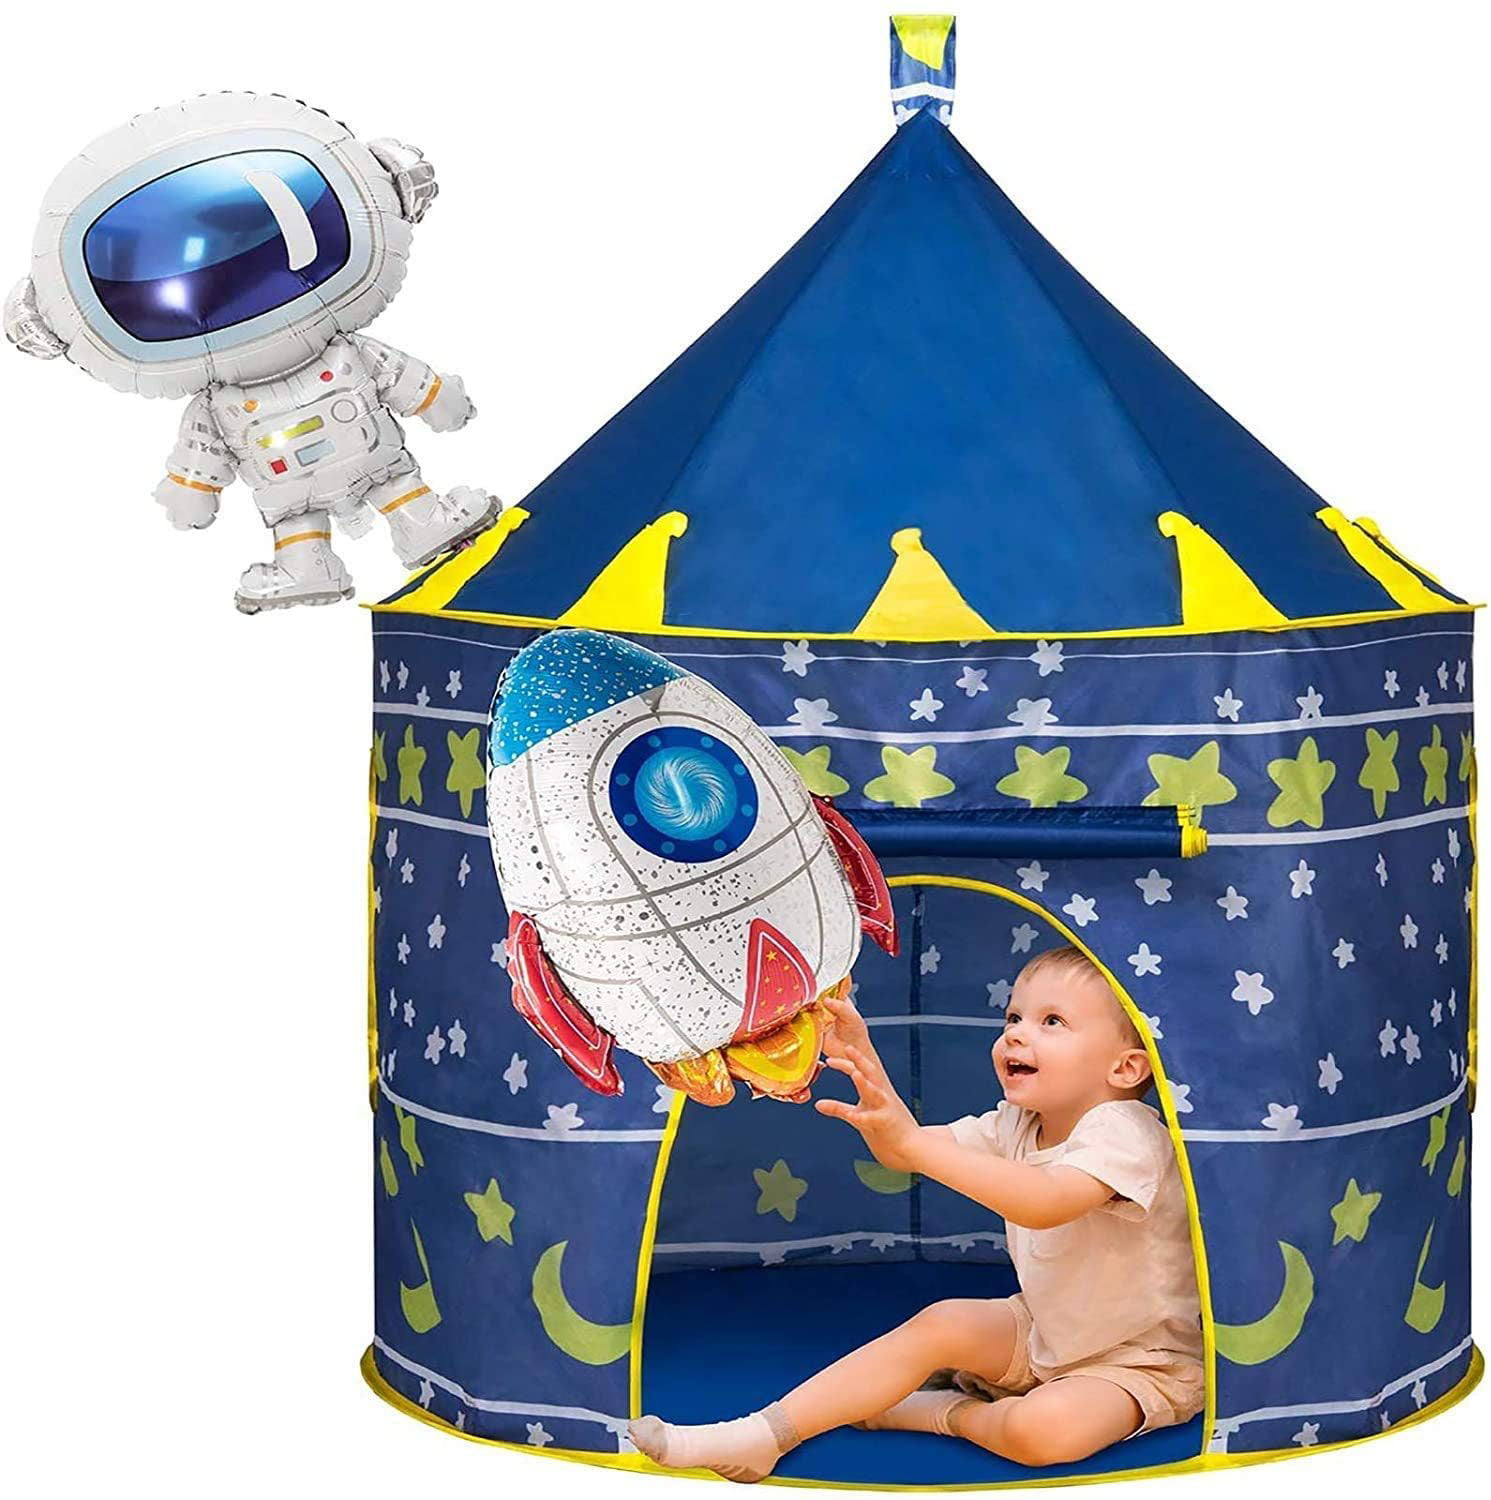 Rocket Ship Play Tent PlayhouseUnique Space and Planet Design for Indoor and 